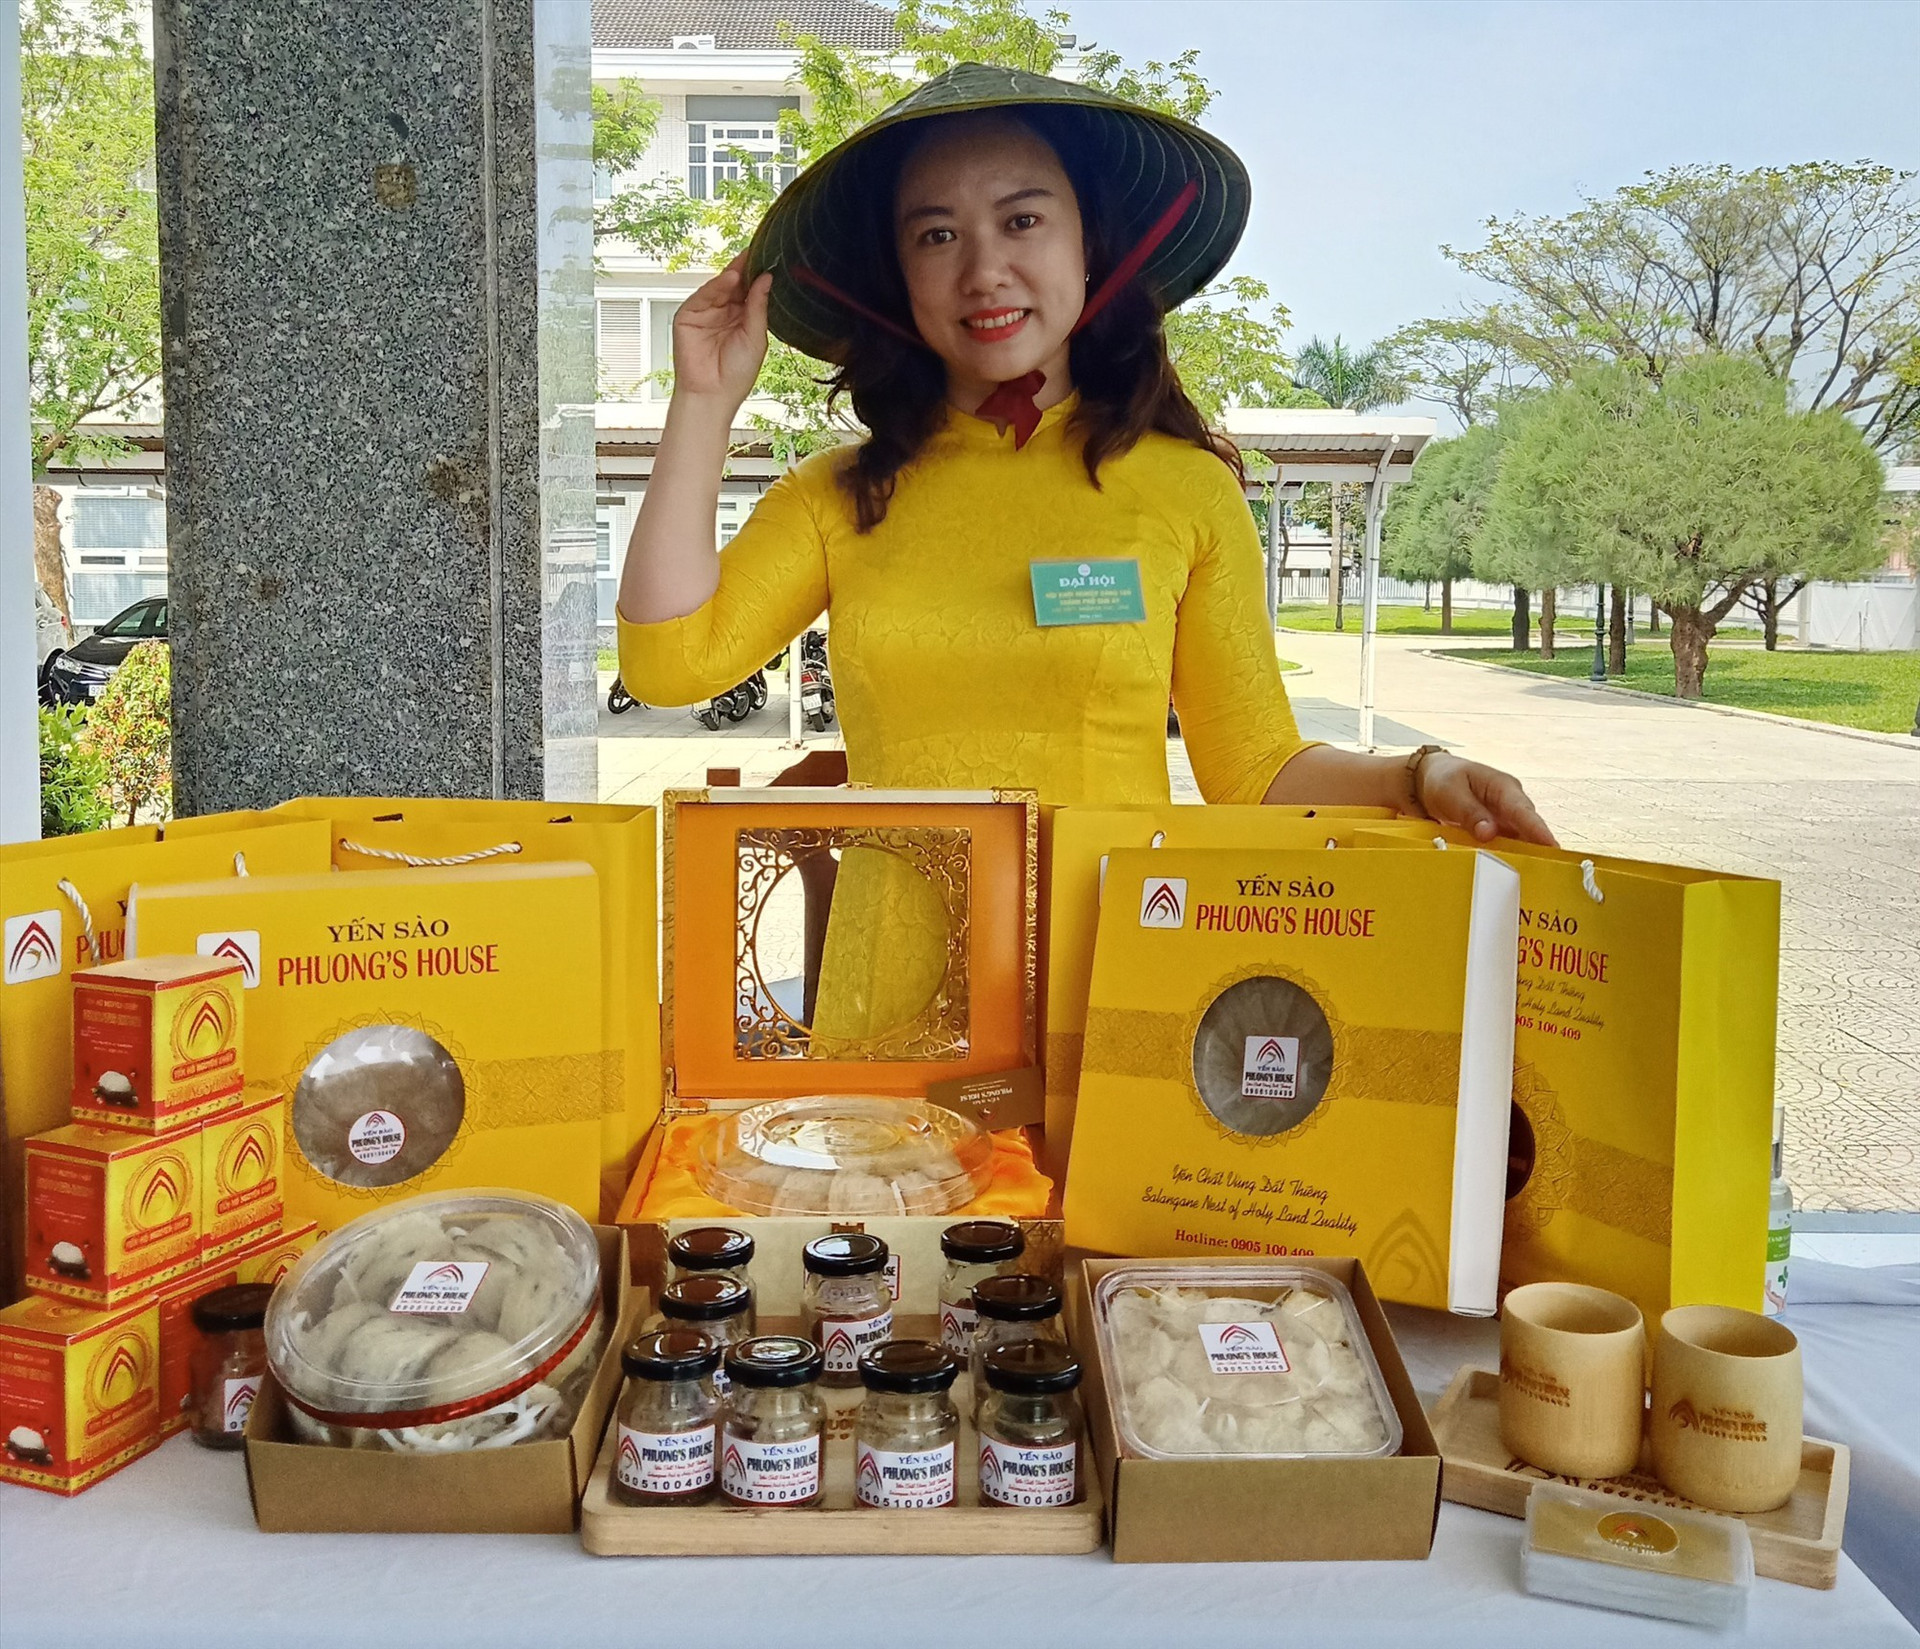 Le Viet Binh Phuong and her products of edible bird’s nest